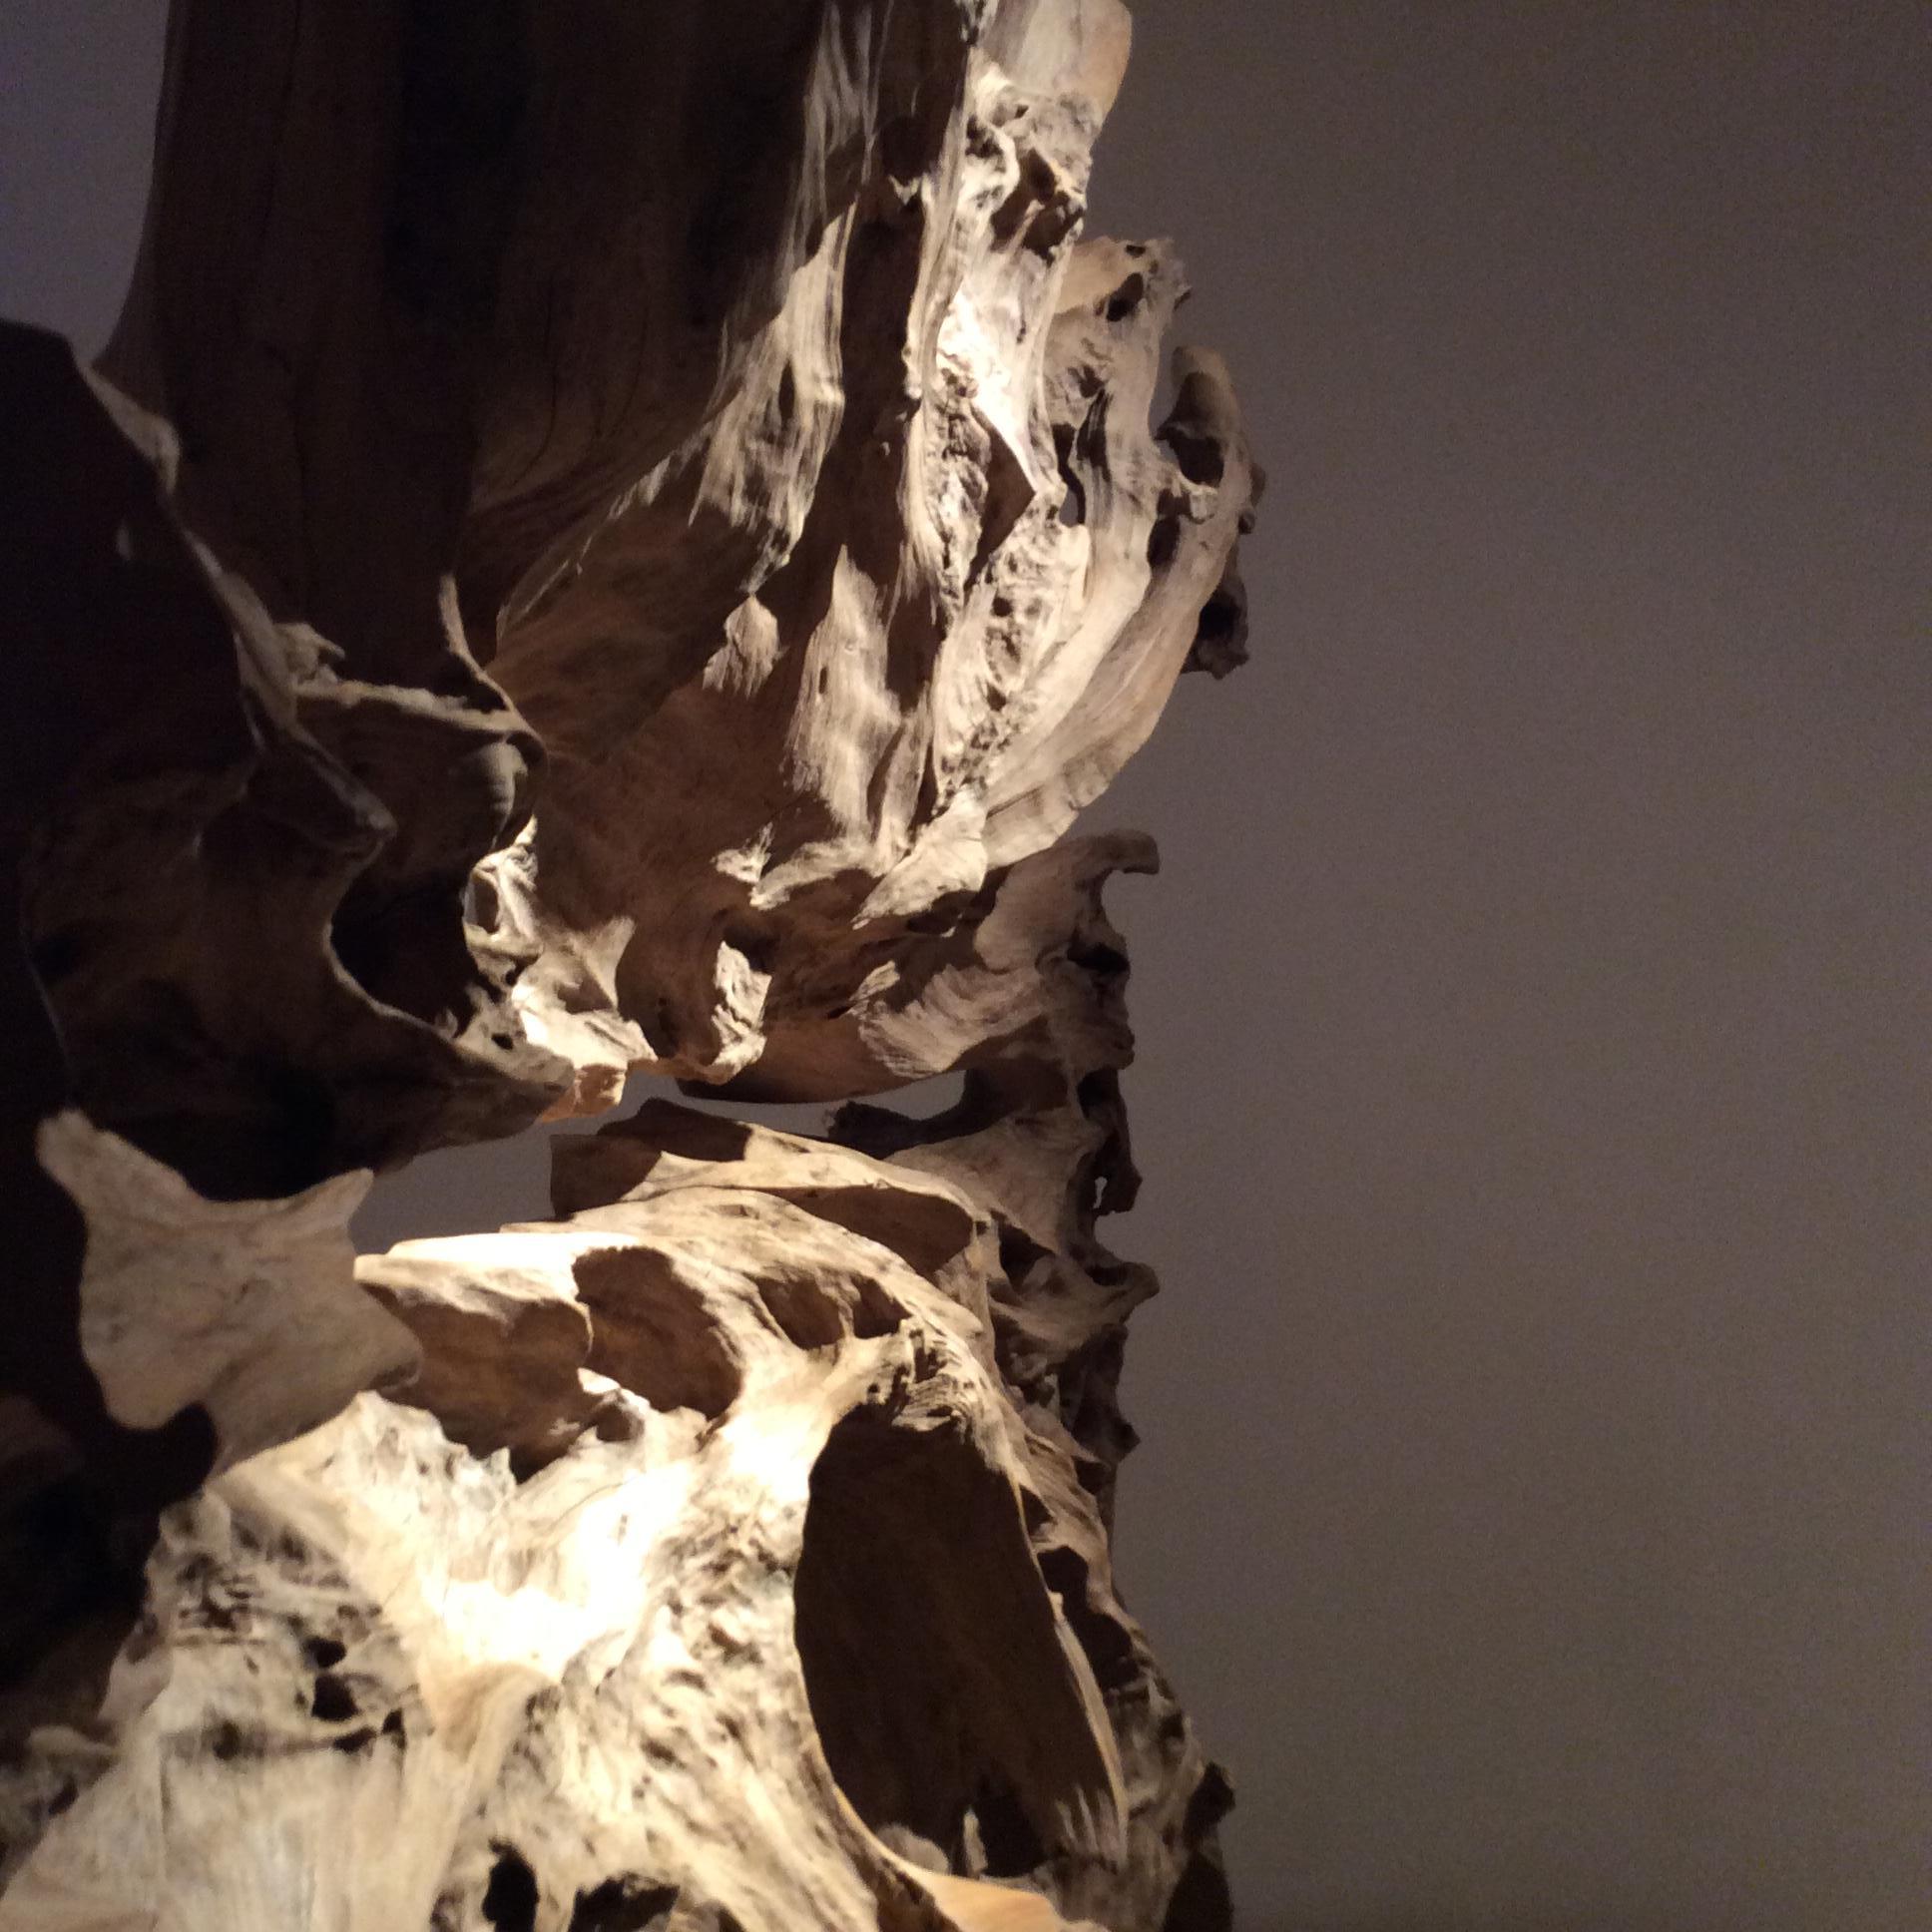 Spectacular free-standing sculpture of an immense teak root from Java. The pale natural root fans out forming a craggy openwork lattice and ensuring dramatic shadows. The French artist, Jerome Abel Seguin, has left the surface matt, resulting in a